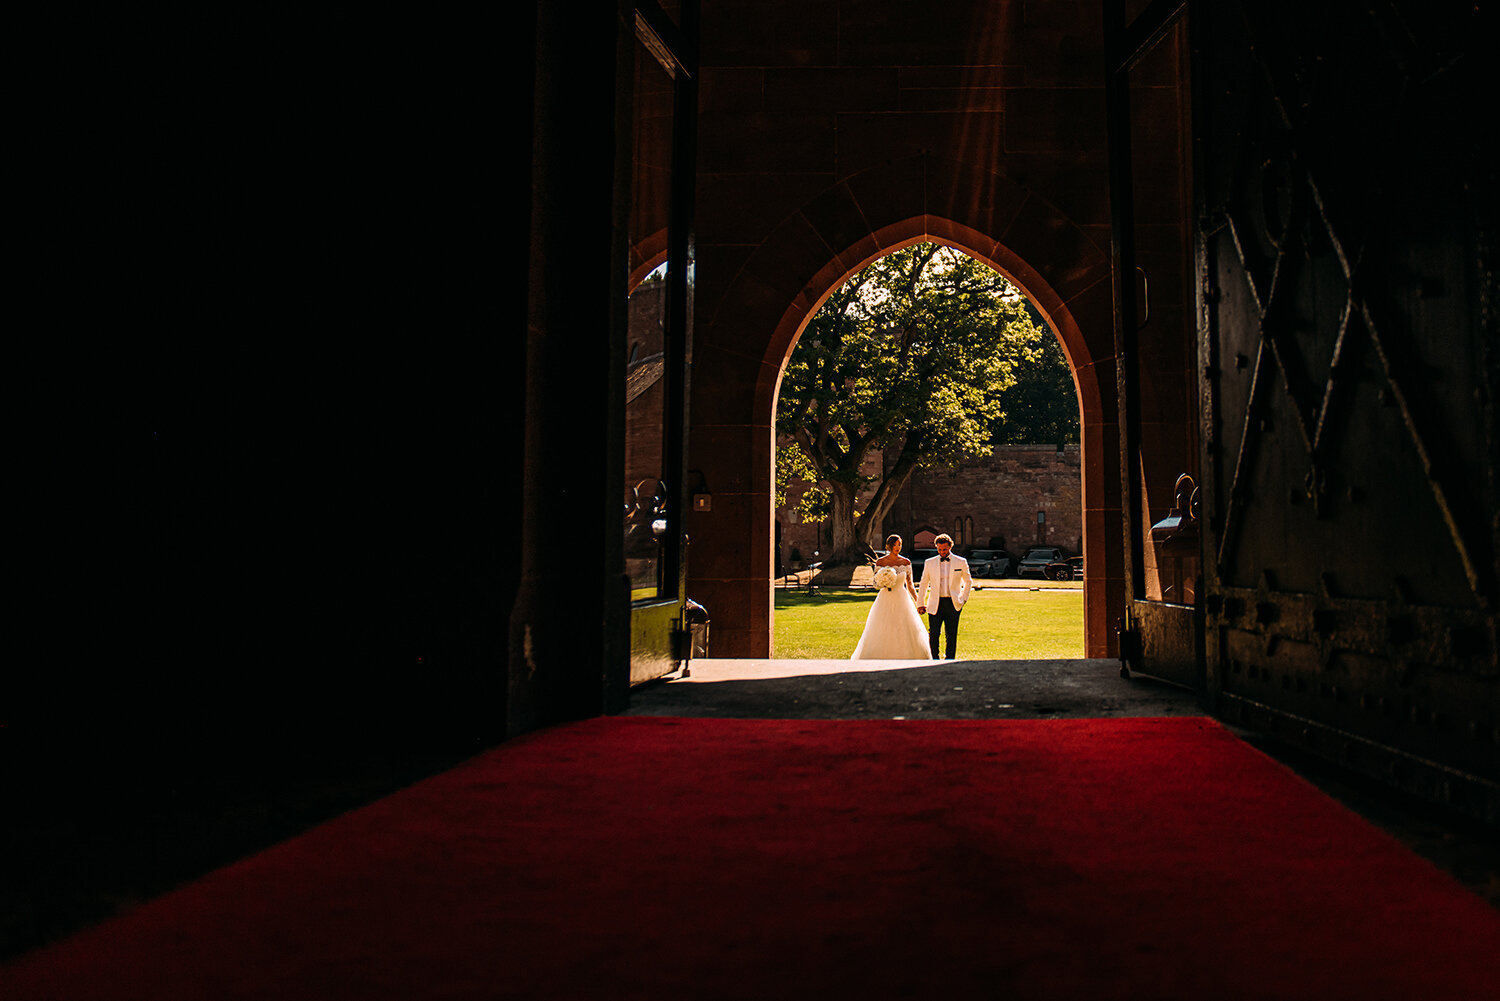  Bride and groom walking to the great hall, framed by the door way 